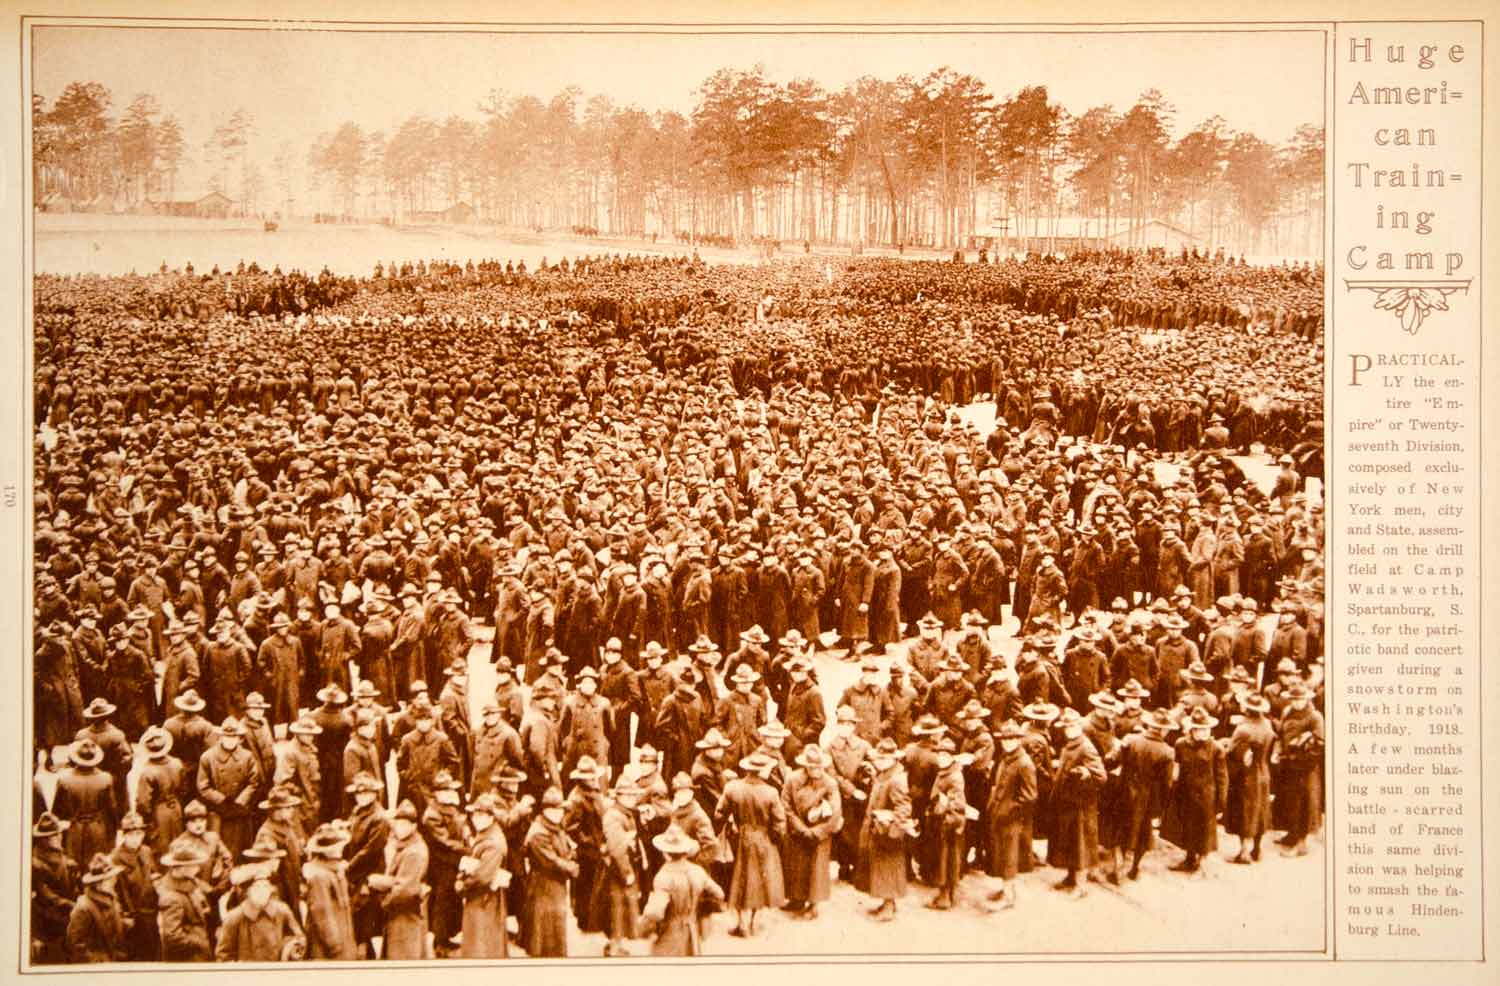 1923 Rotogravure WWI Camp Wadsworth Training Camp 27th Infantry Division Troops